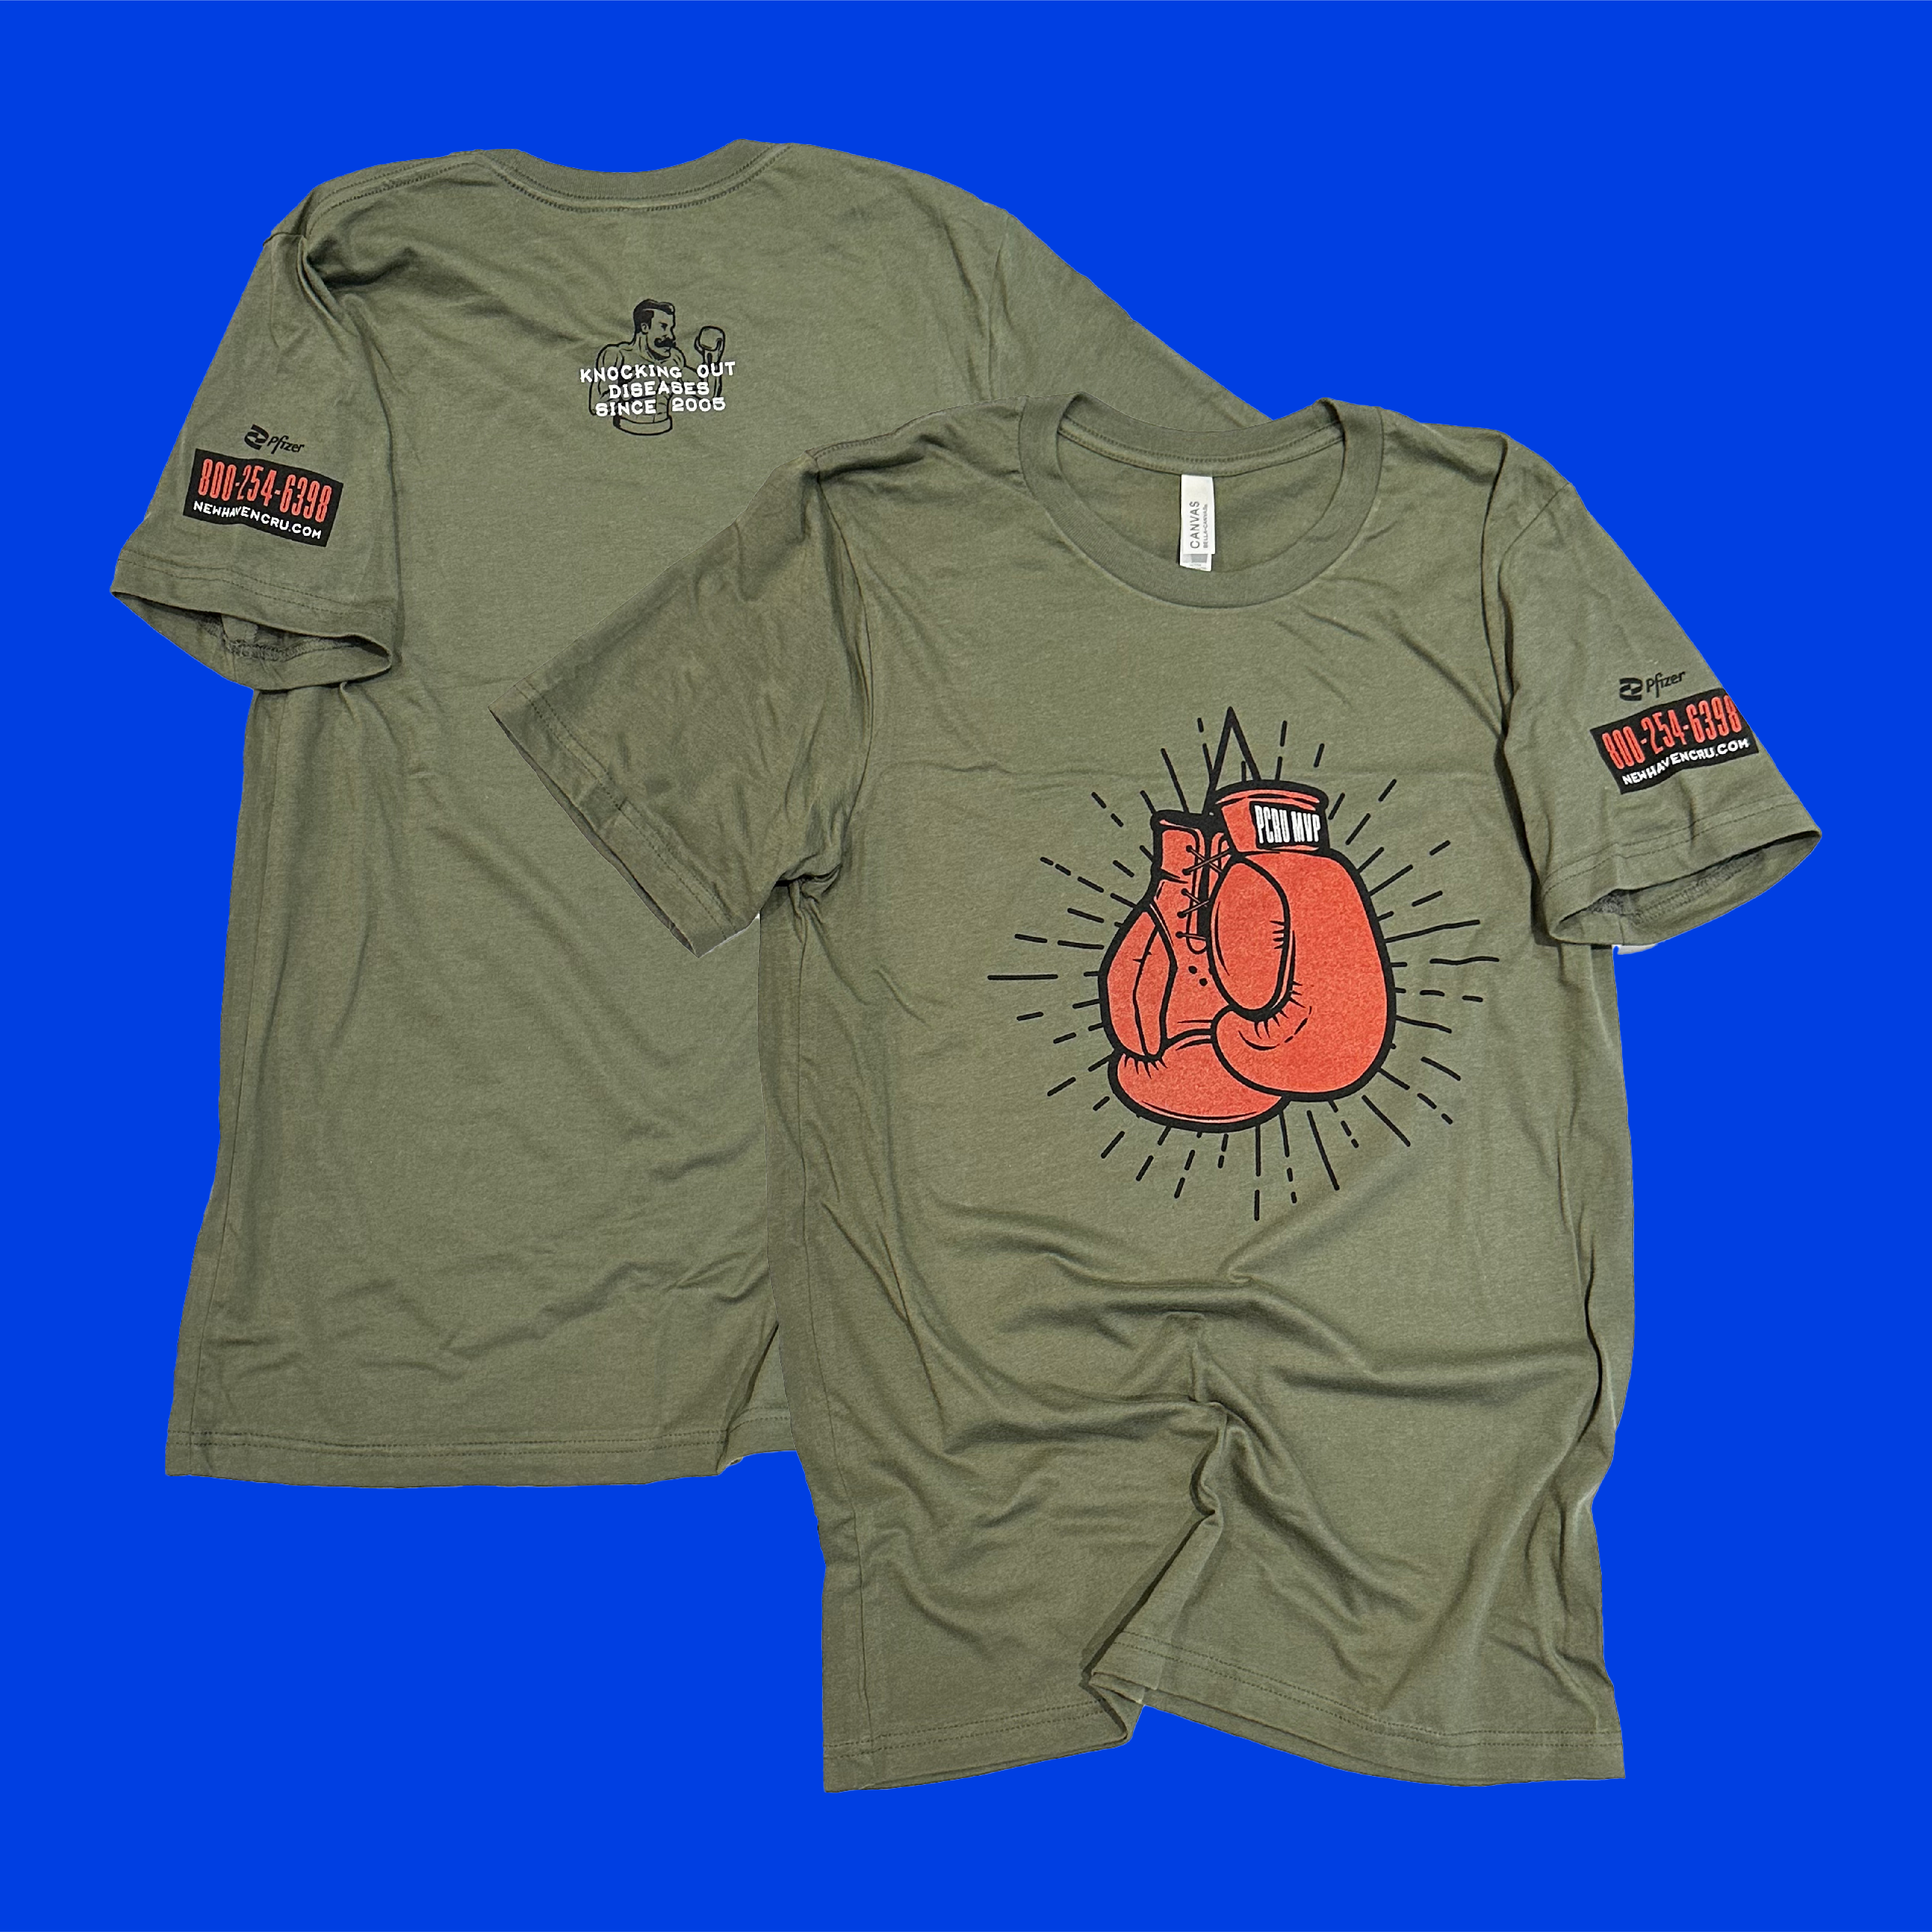  A medium green t-shirt on a bold blue background with an image of boxing gloves that say "PCRU MVP" printed on the front and writing on the back and sleeve.